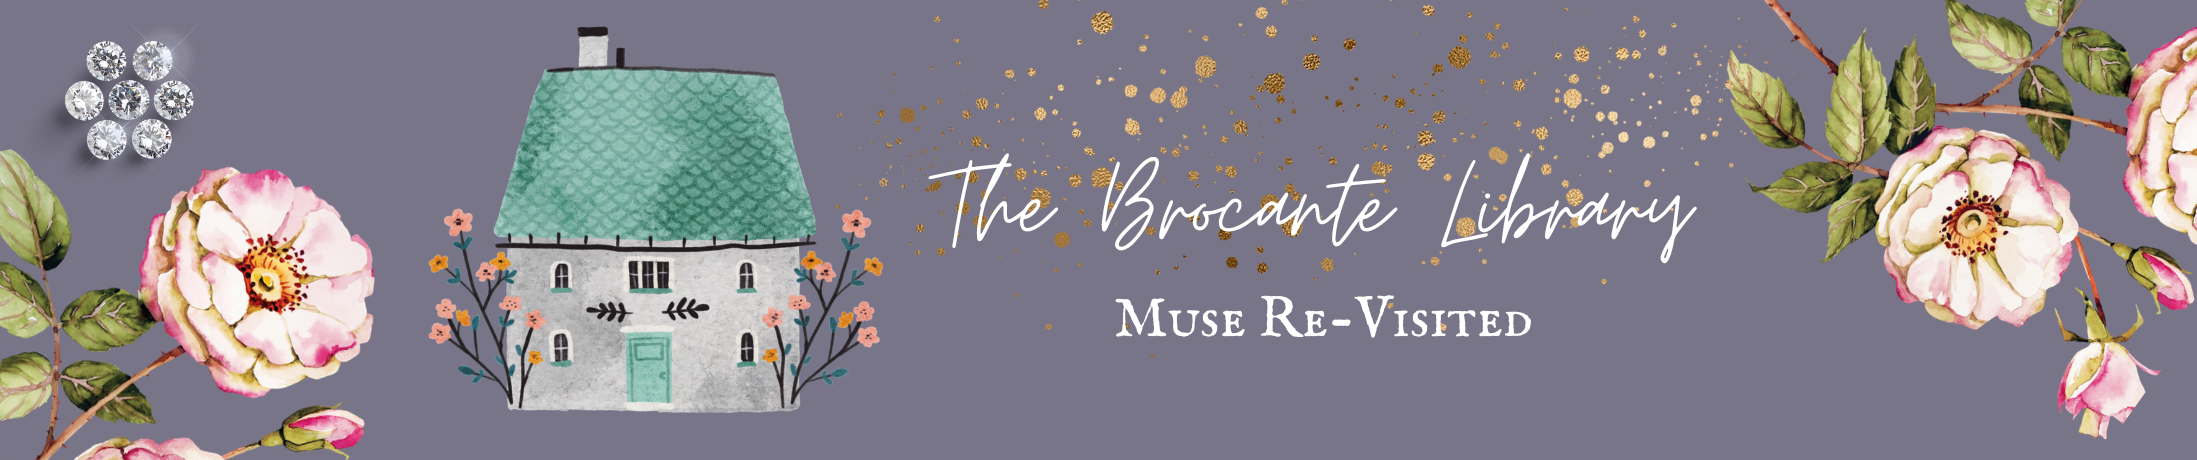 #COURSE - Muse Re-Visited | Brocante Library